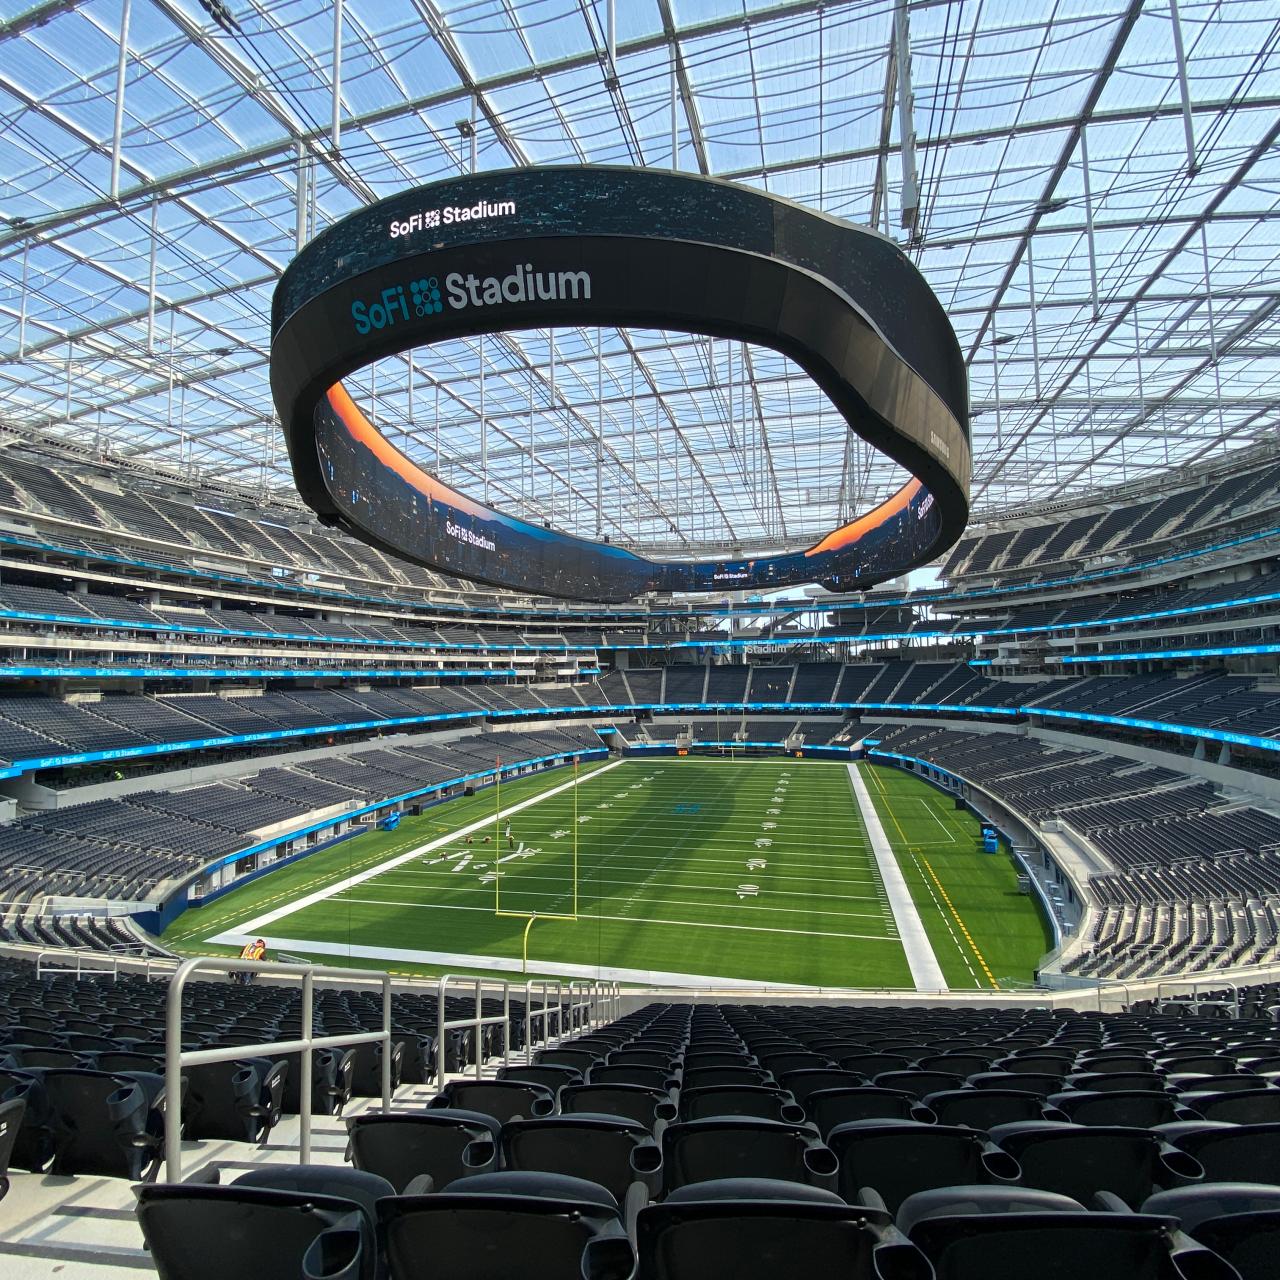 NFL SUPER STADIUMS Follows the Epic Journey of Building SoFi Stadium DNews Discovery